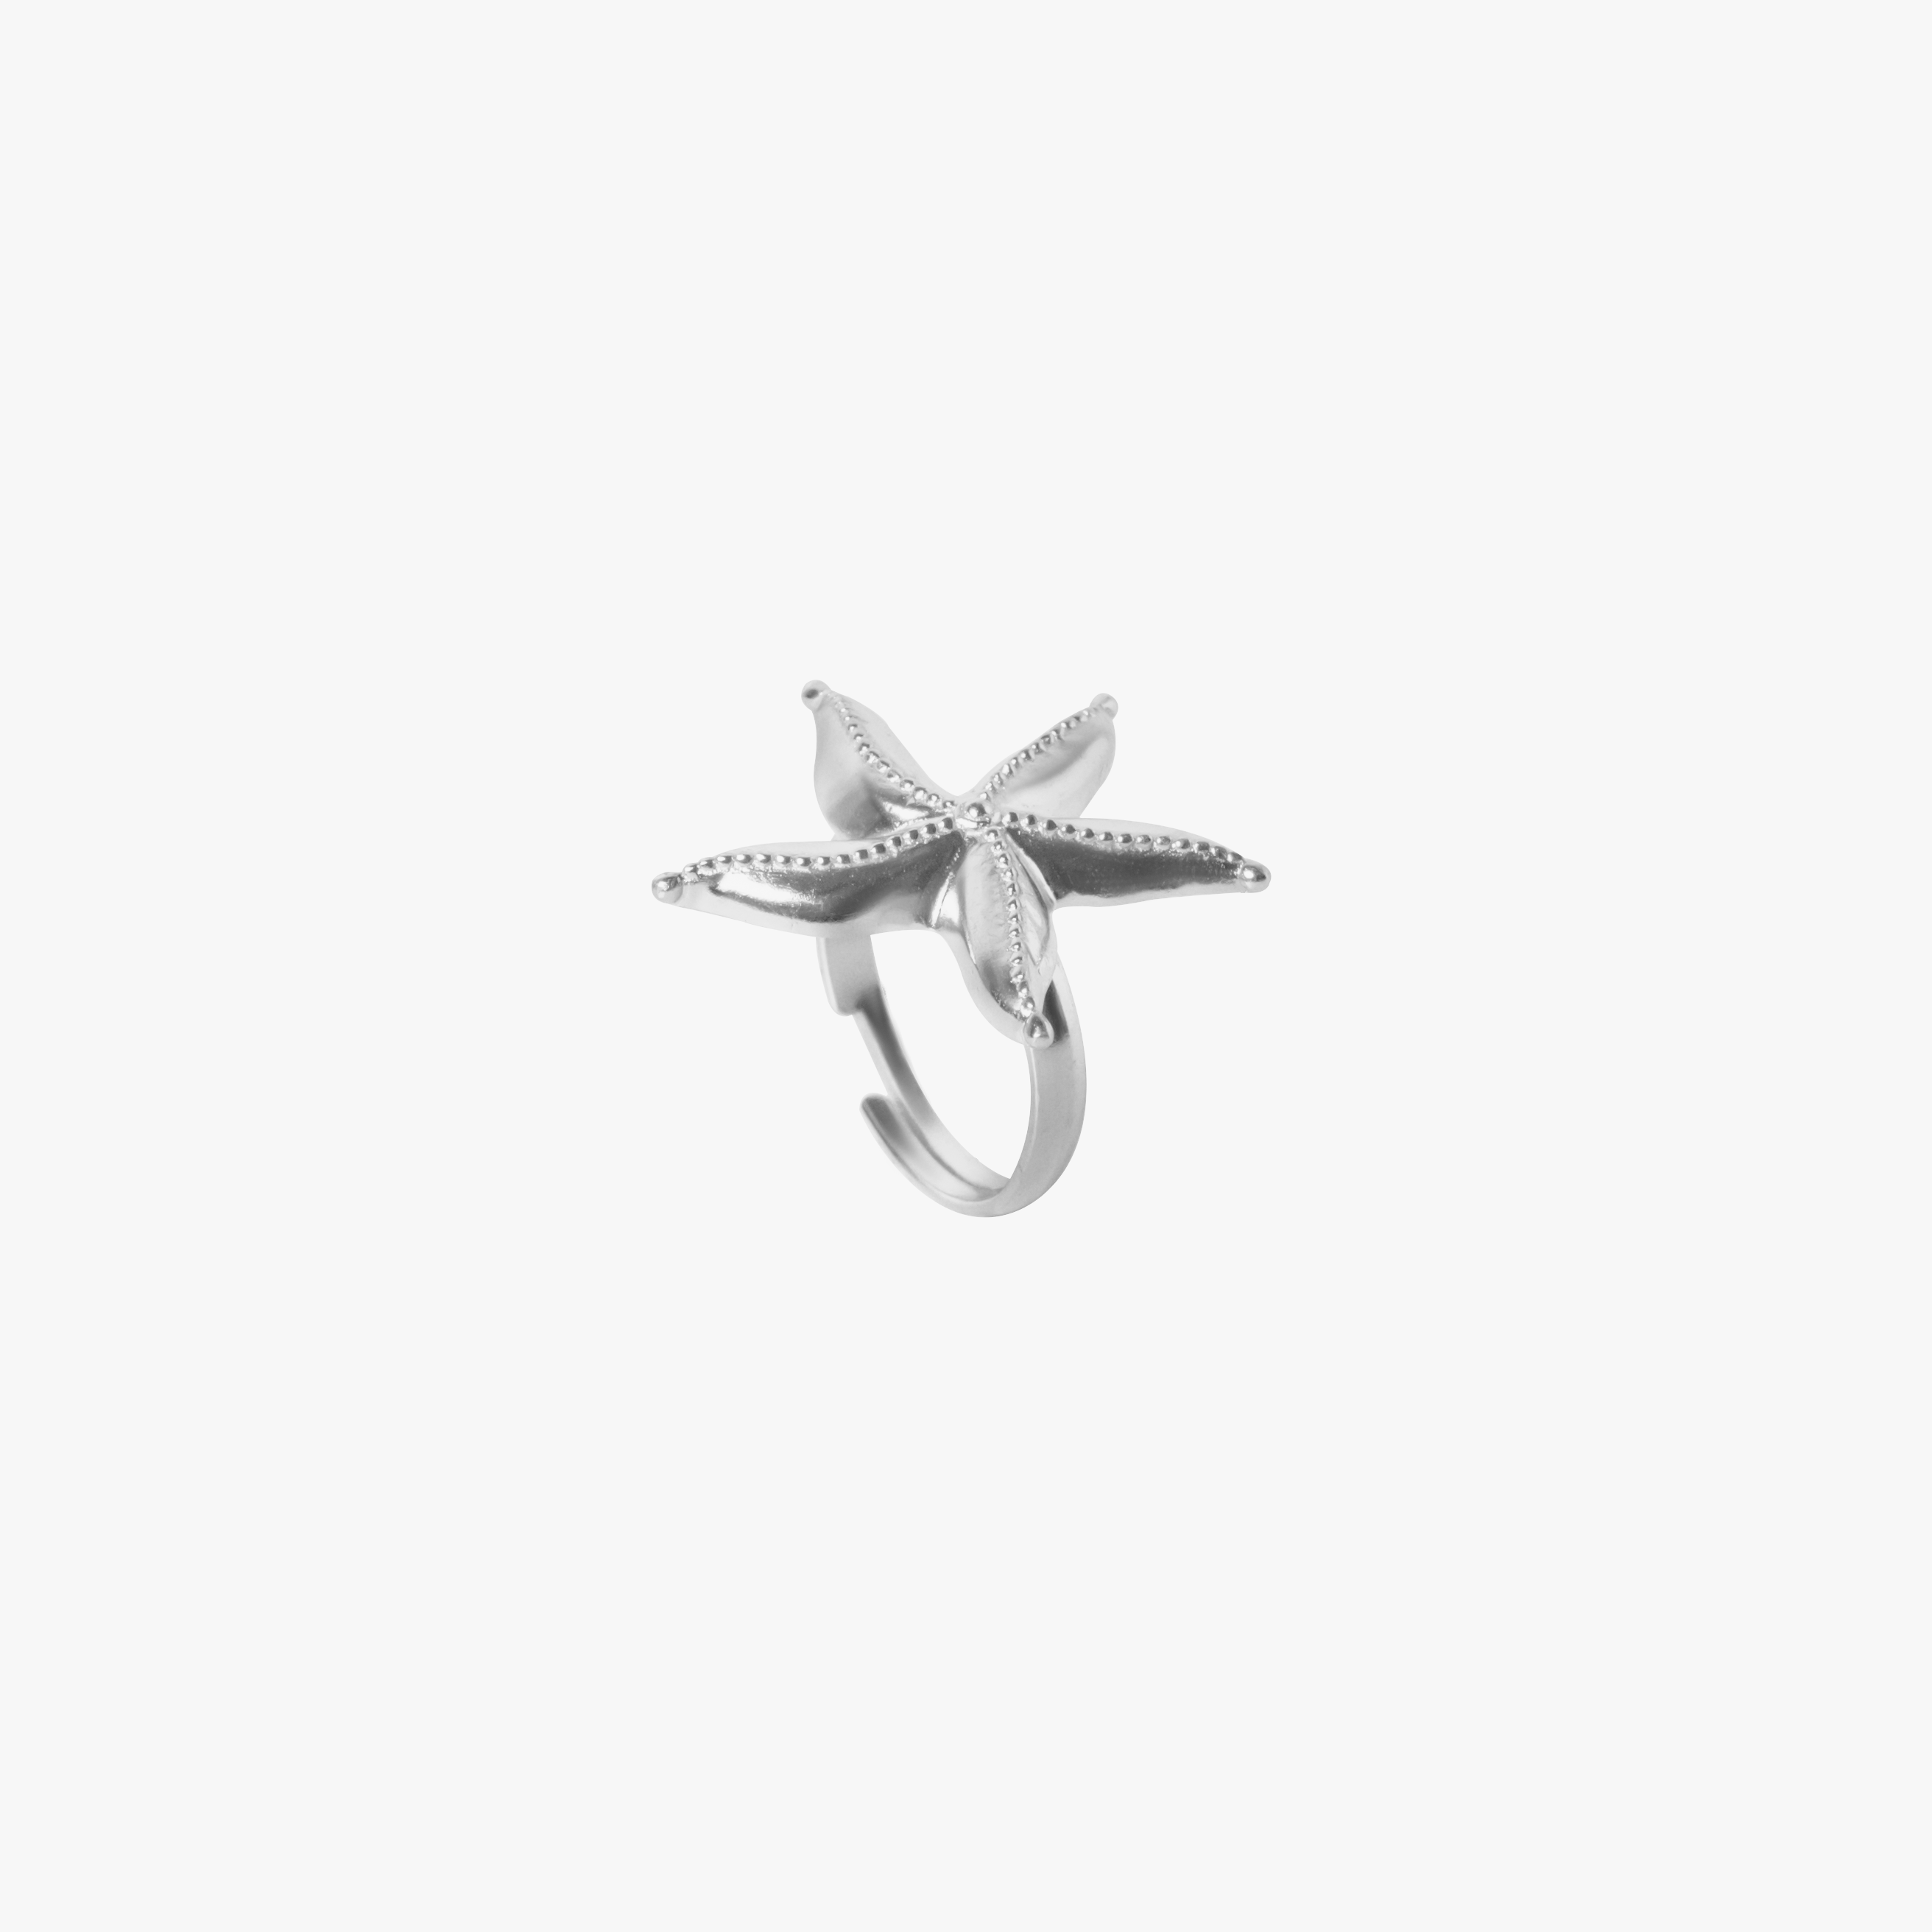 SEA STAR RING SILVER TONE , a product by Equiivalence